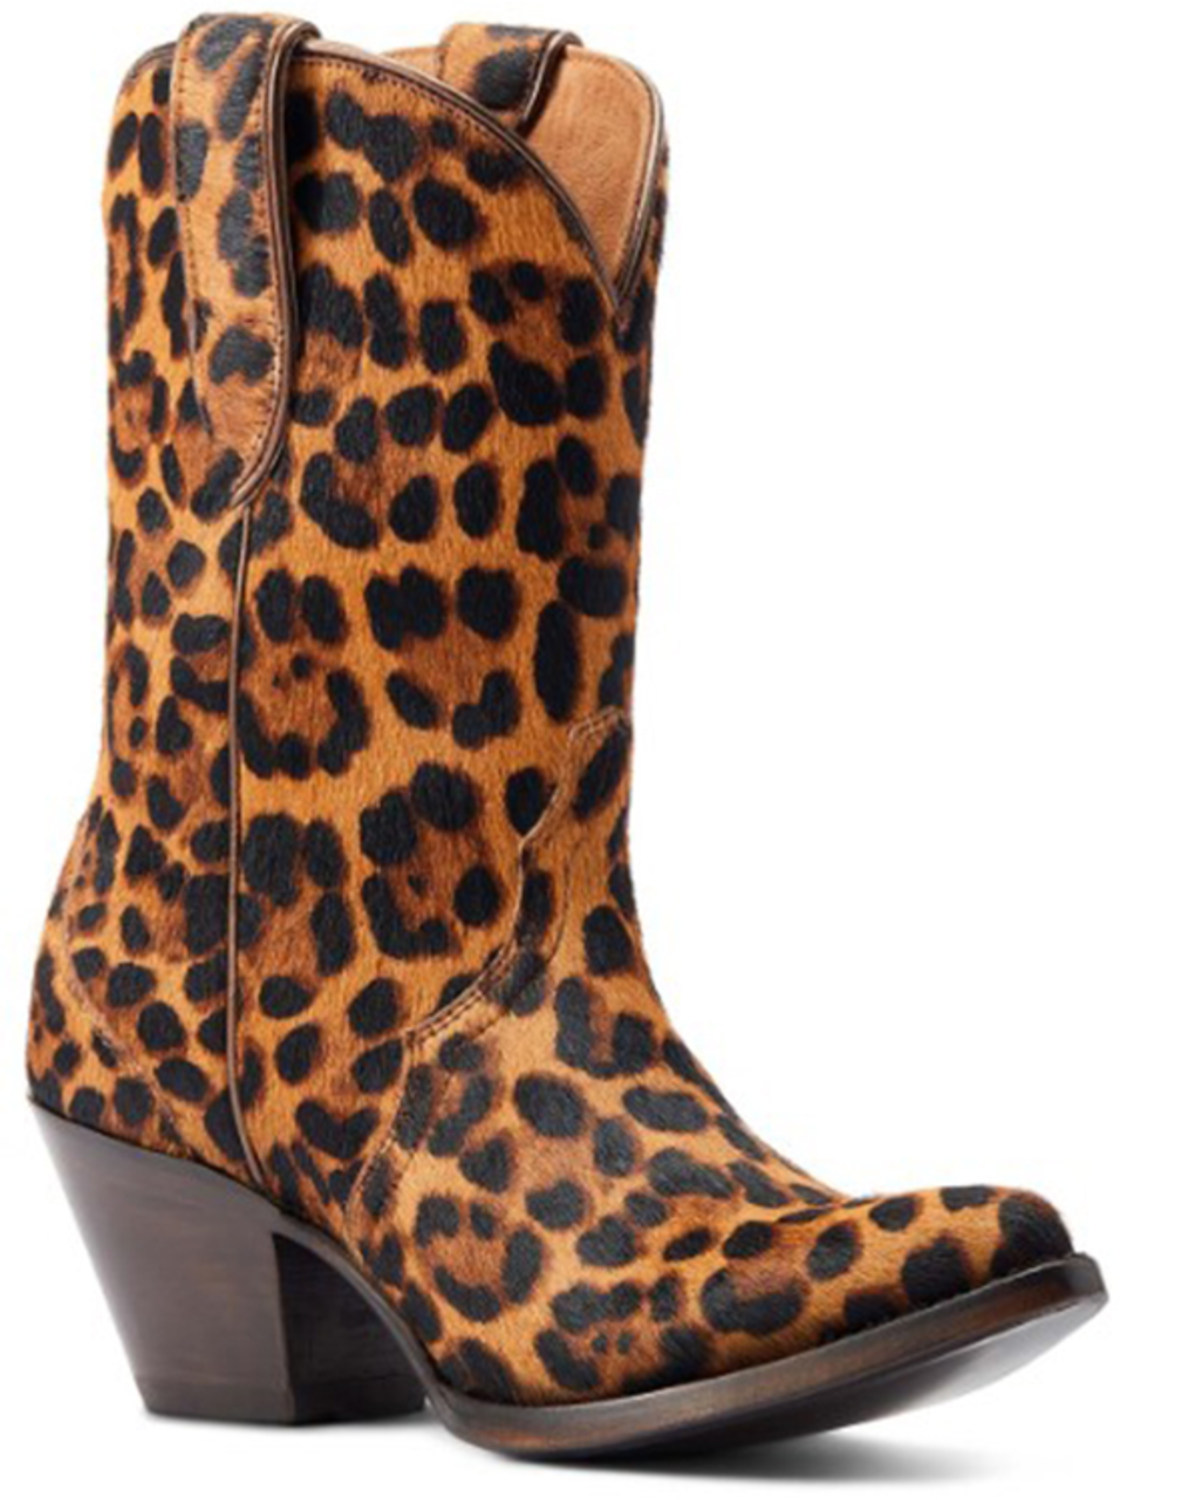 Ariat Women's Bandida Leopard Print Hair On Hide Western Boots - Pointed Toe